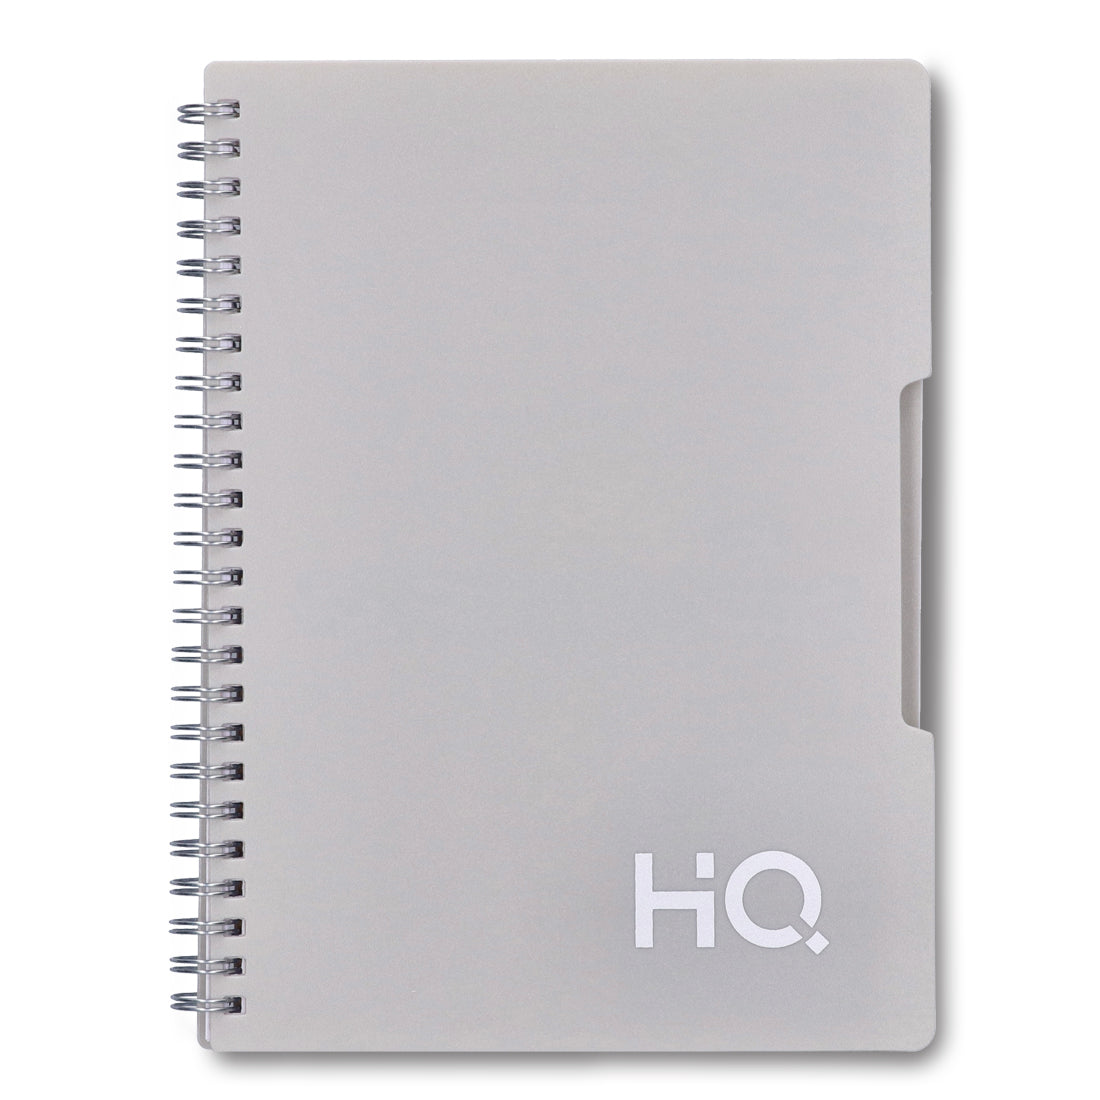 Navneet HQ | Single Subject Book - Grey with PP cover | For office and personal use | Wiro / Spiral Bound | Single Line | A5 Size - 14.8 cm x 21 cm | 160 Pages | Pack of 1